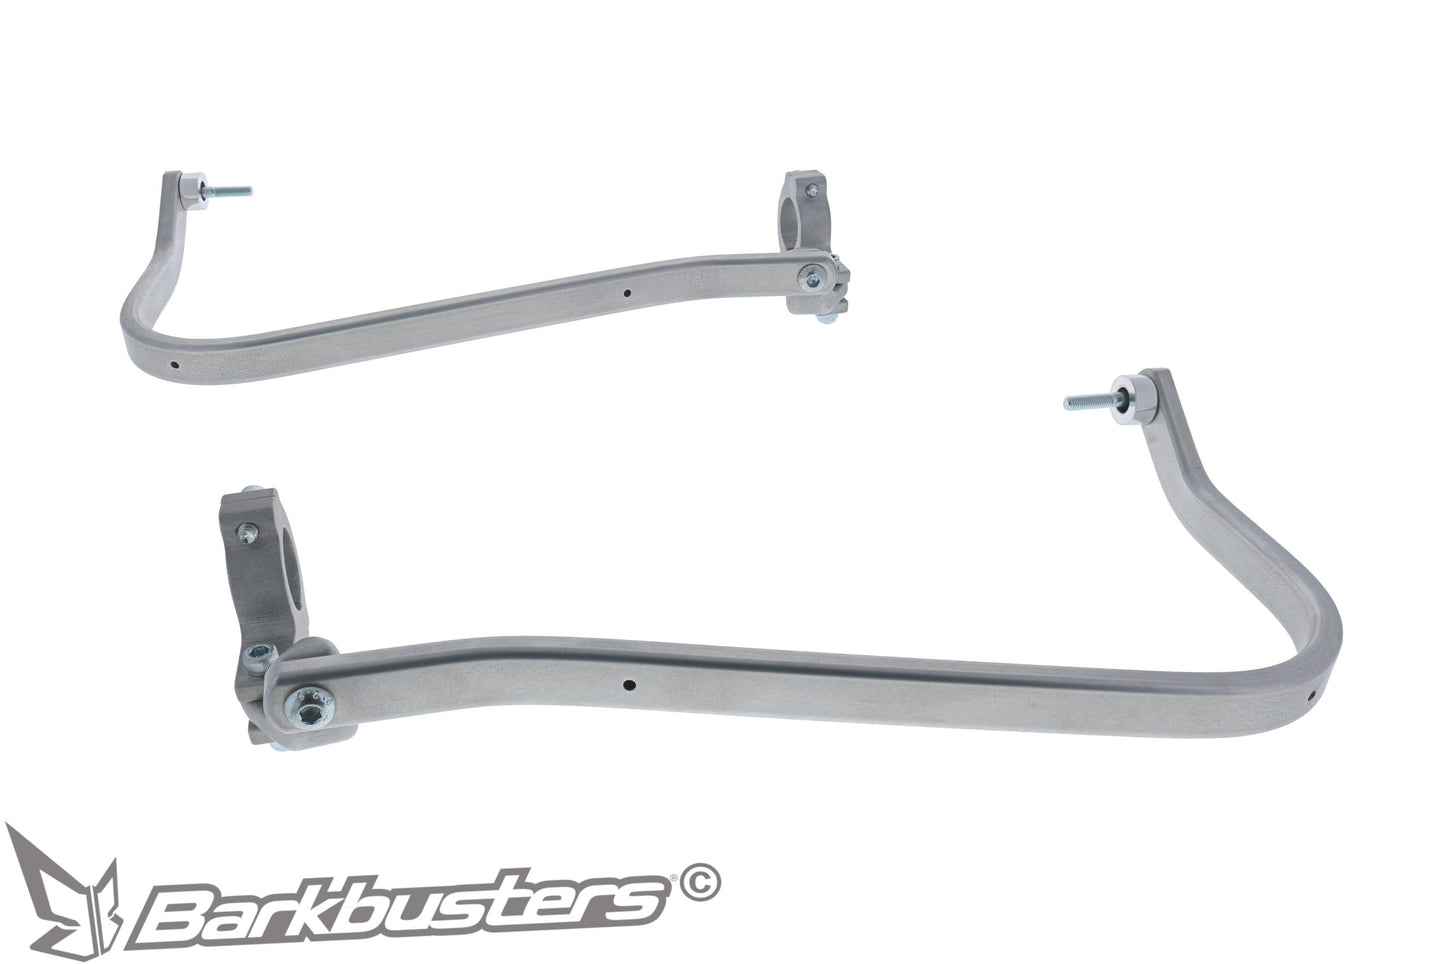 Barkbusters Hardware Kit - Two Point Mount